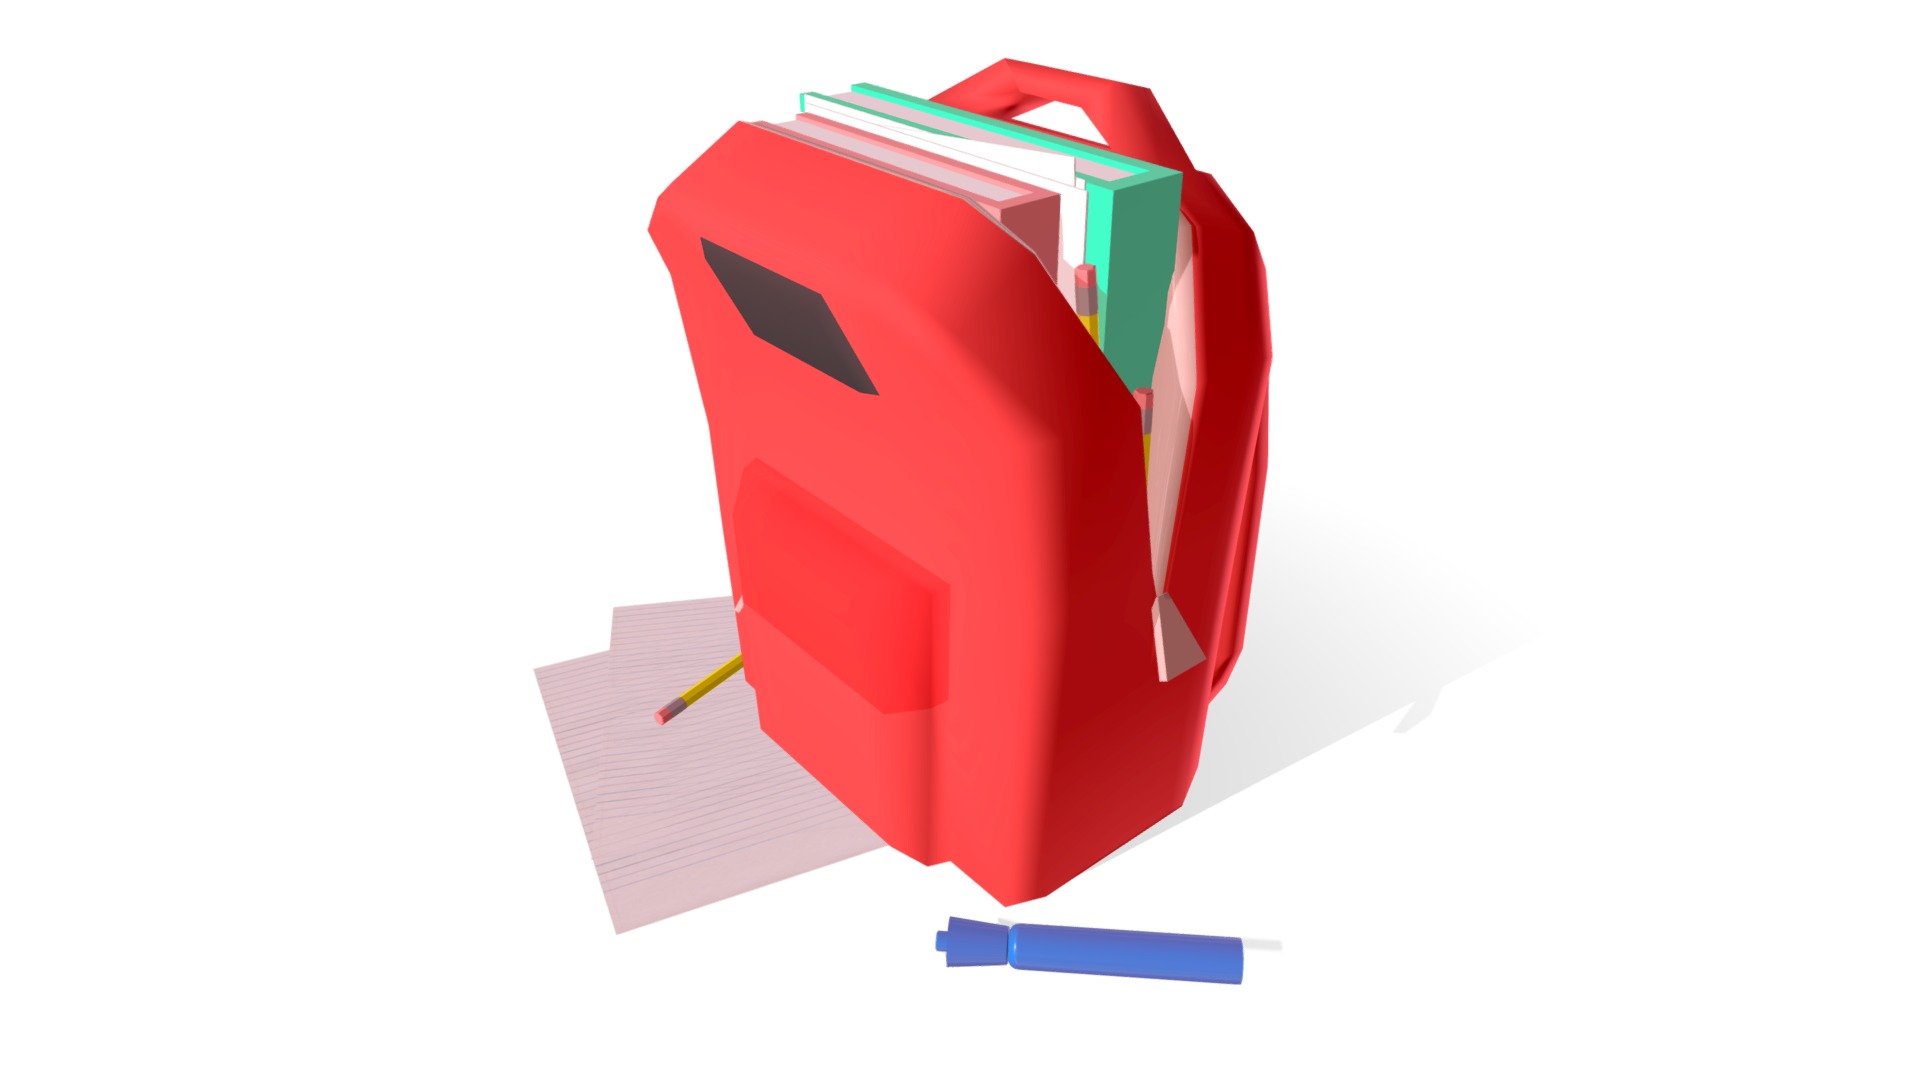 3D model Back to School! - This is a 3D model of the Back to School!. The 3D model is about a red and blue computer mouse.